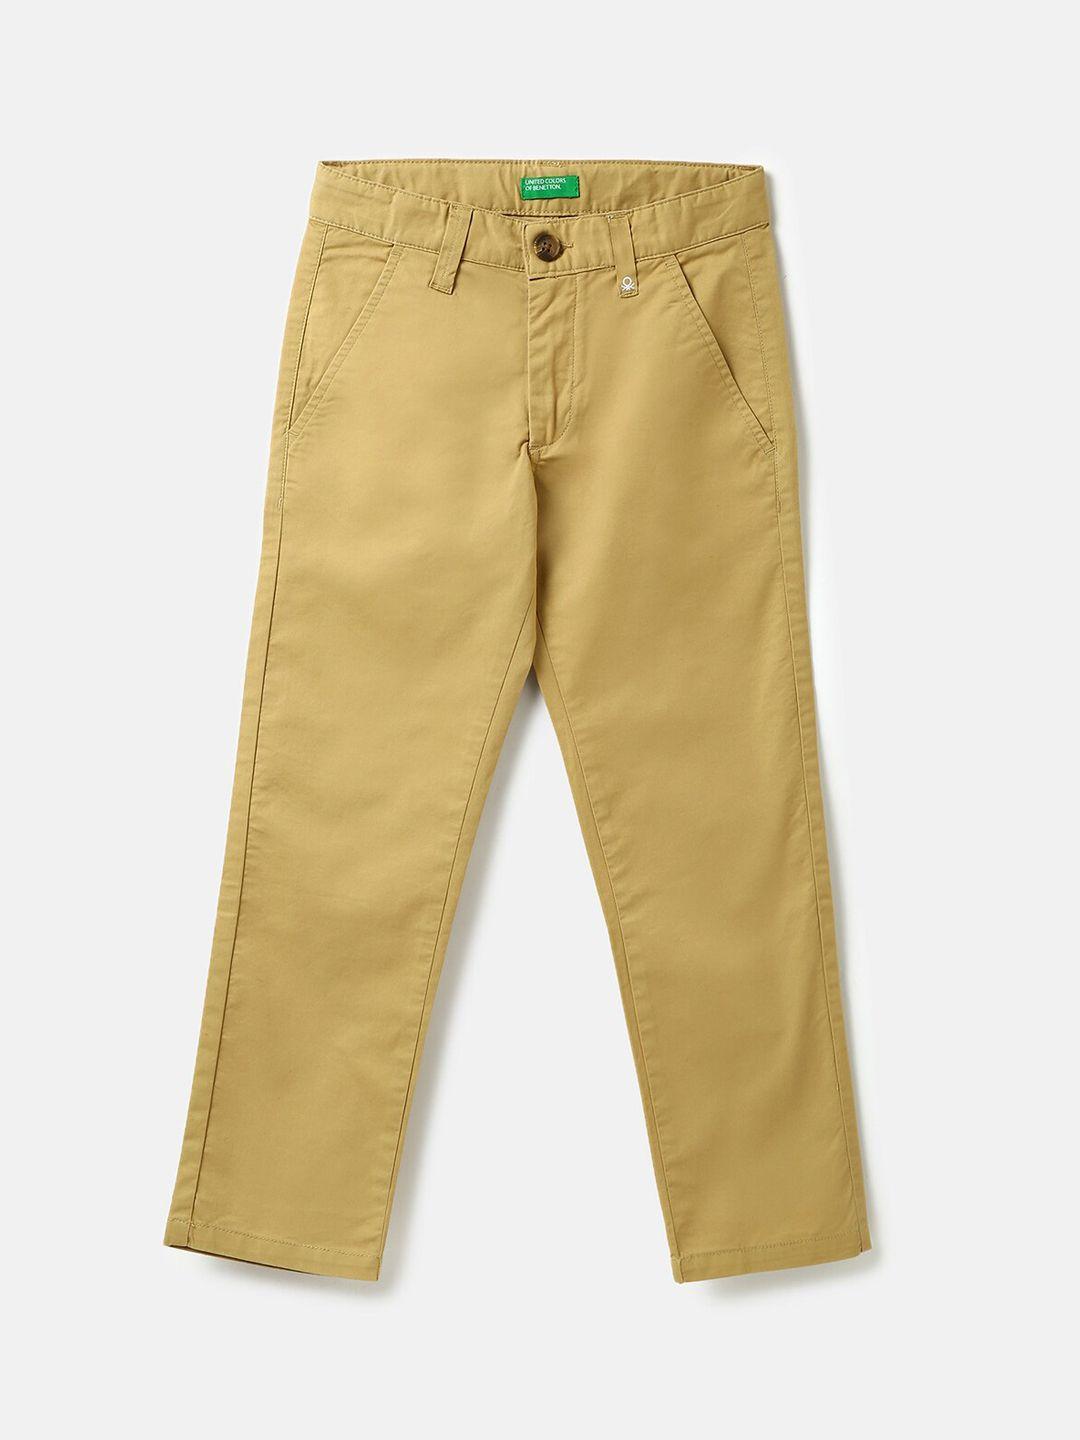 united-colors-of-benetton-boys-regular-fit-cotton-chinos